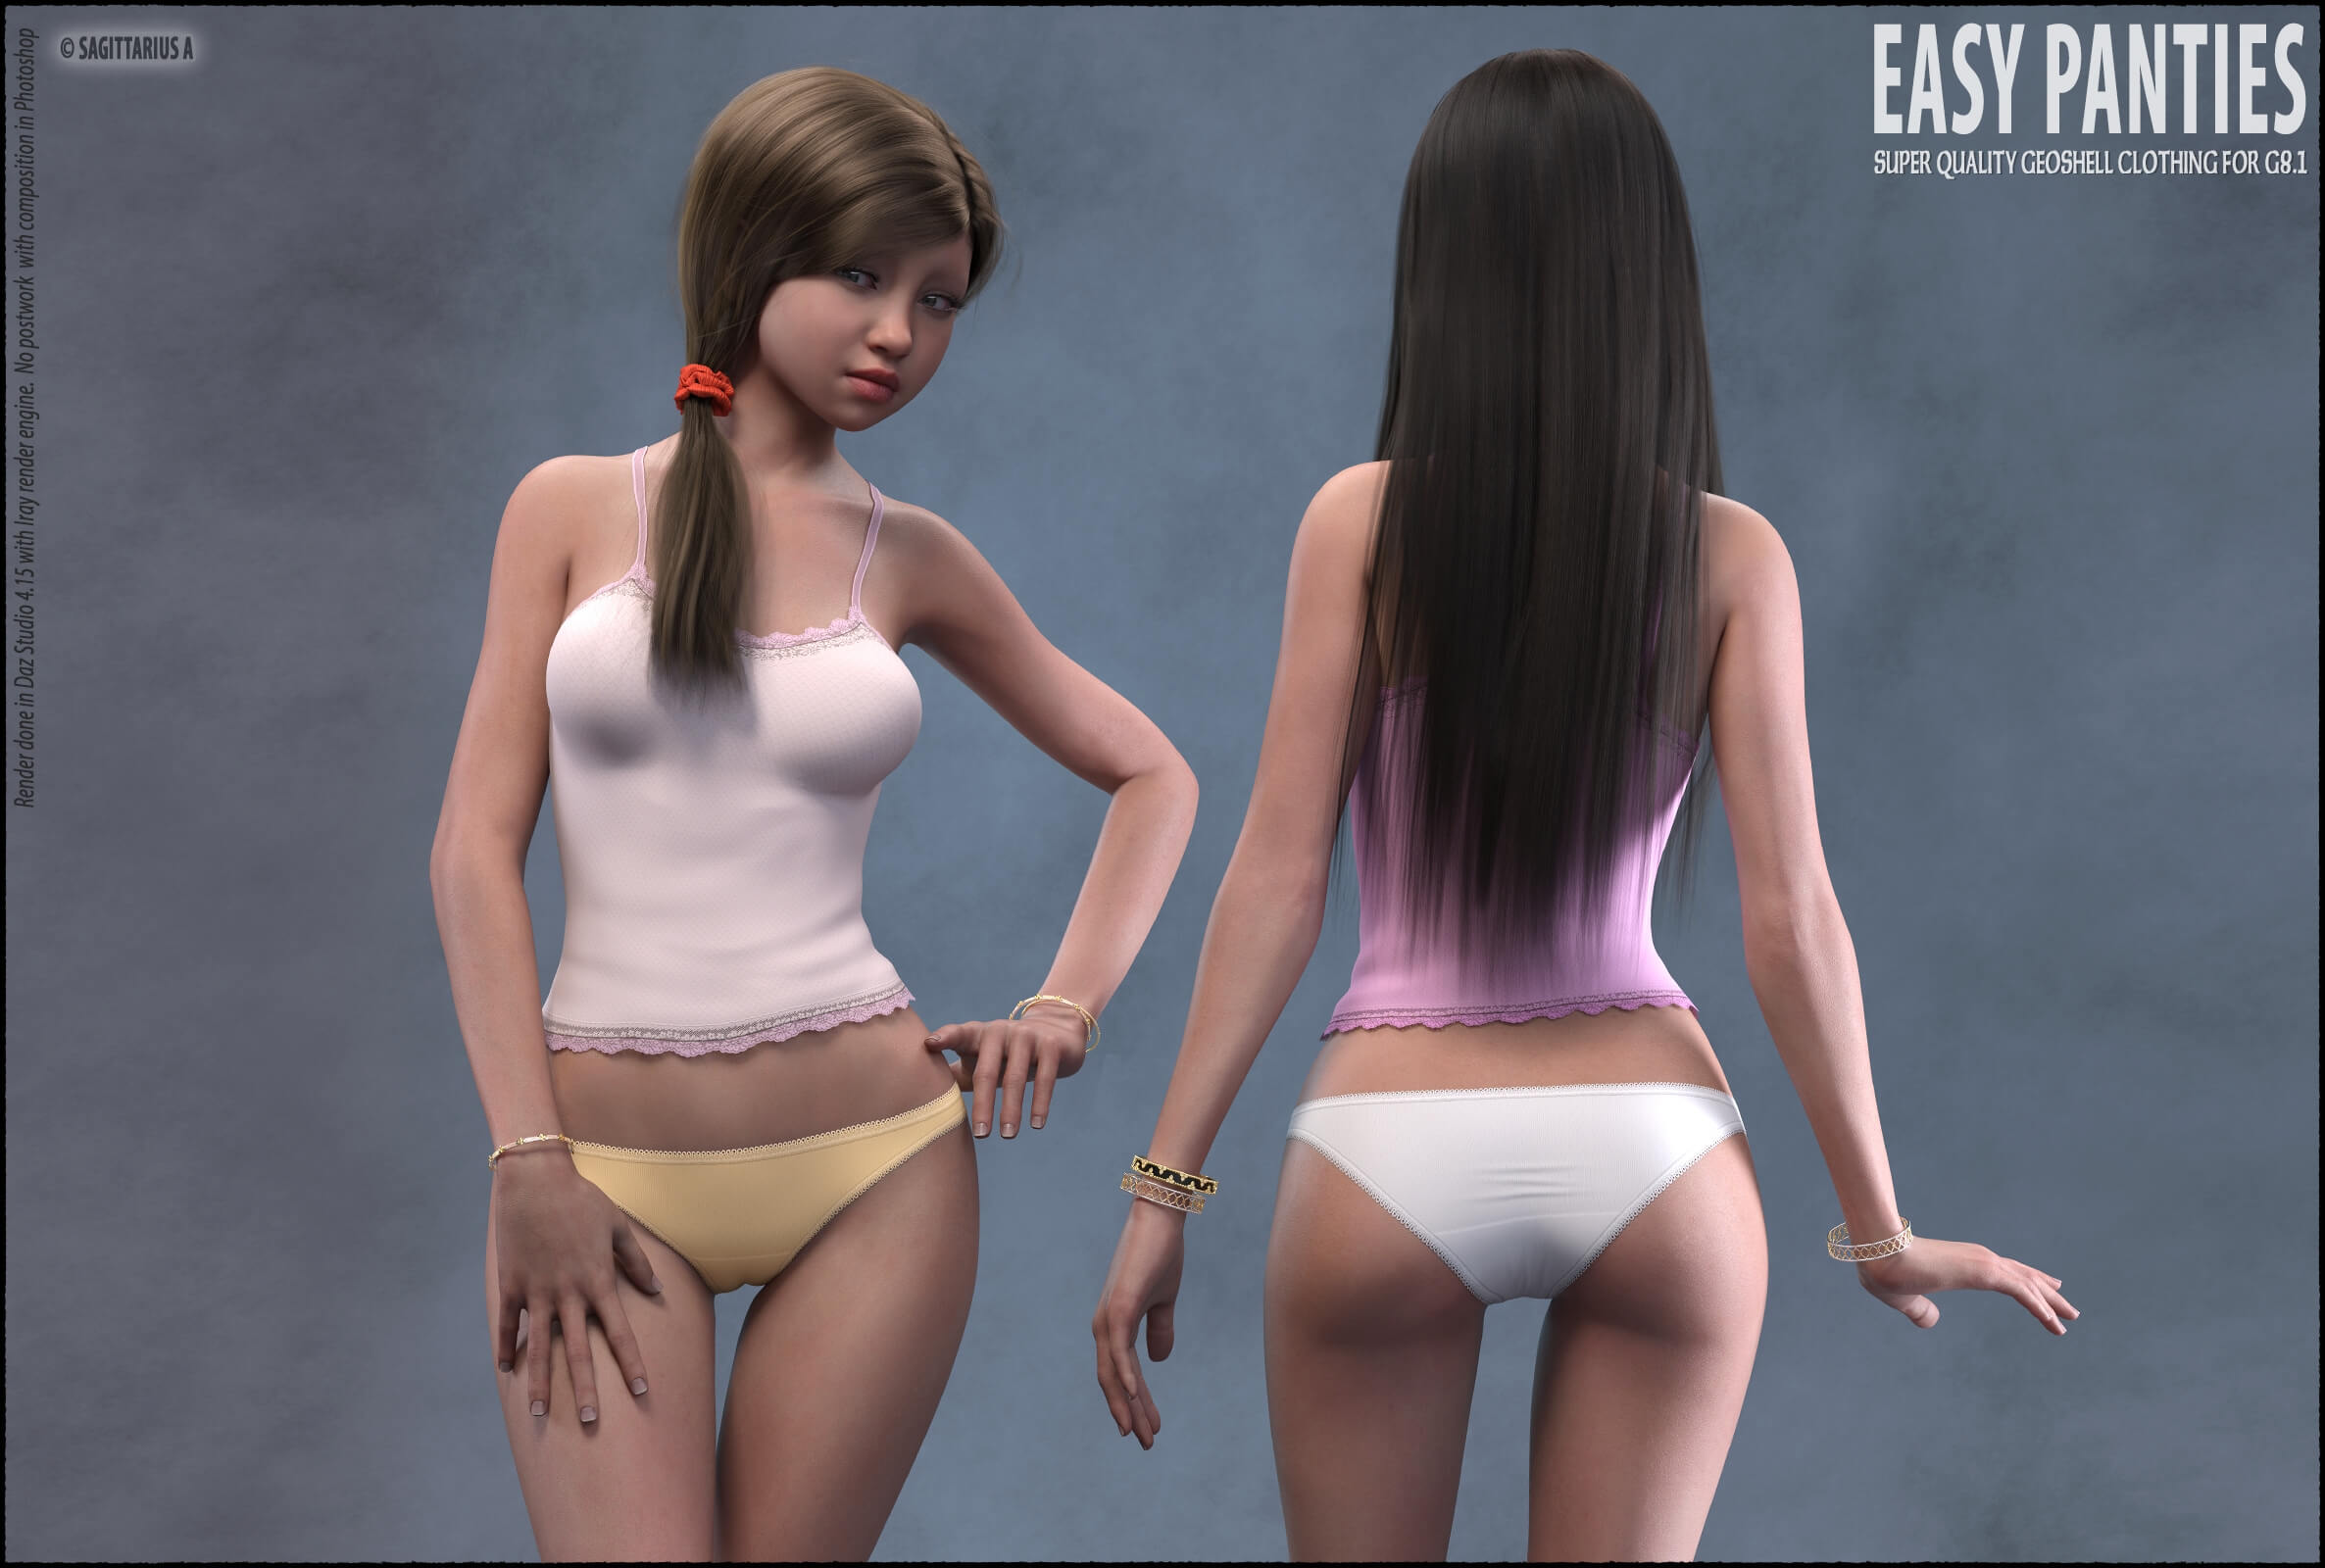 easy panties for genesis 8 1 and 8 female personal license 01fc0c81450f03fc77